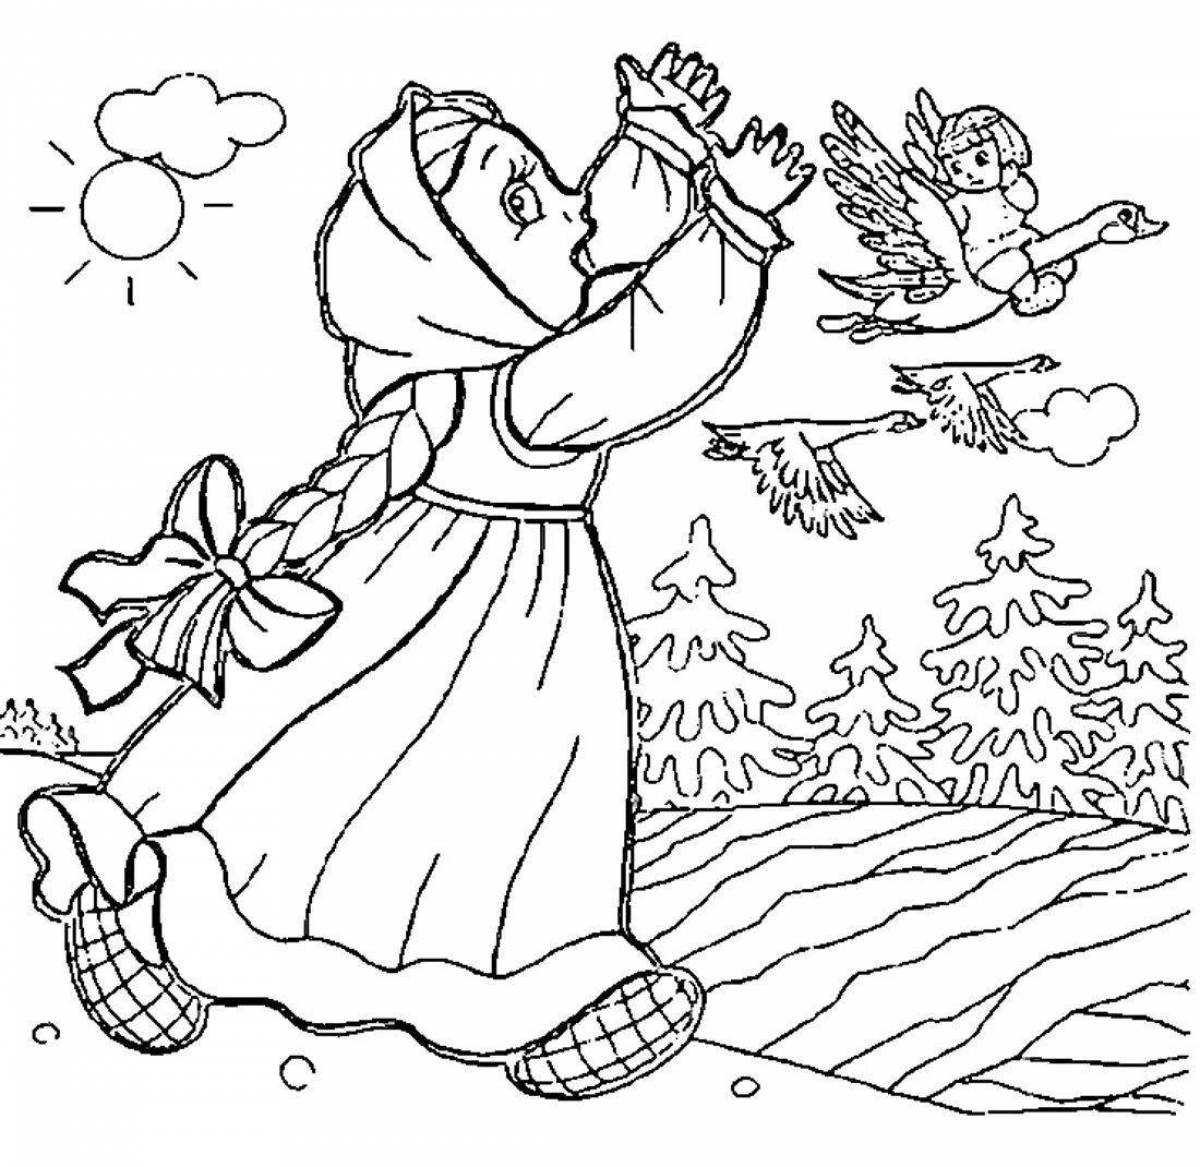 Colorful coloring book based on fairy tales for children Russian folk